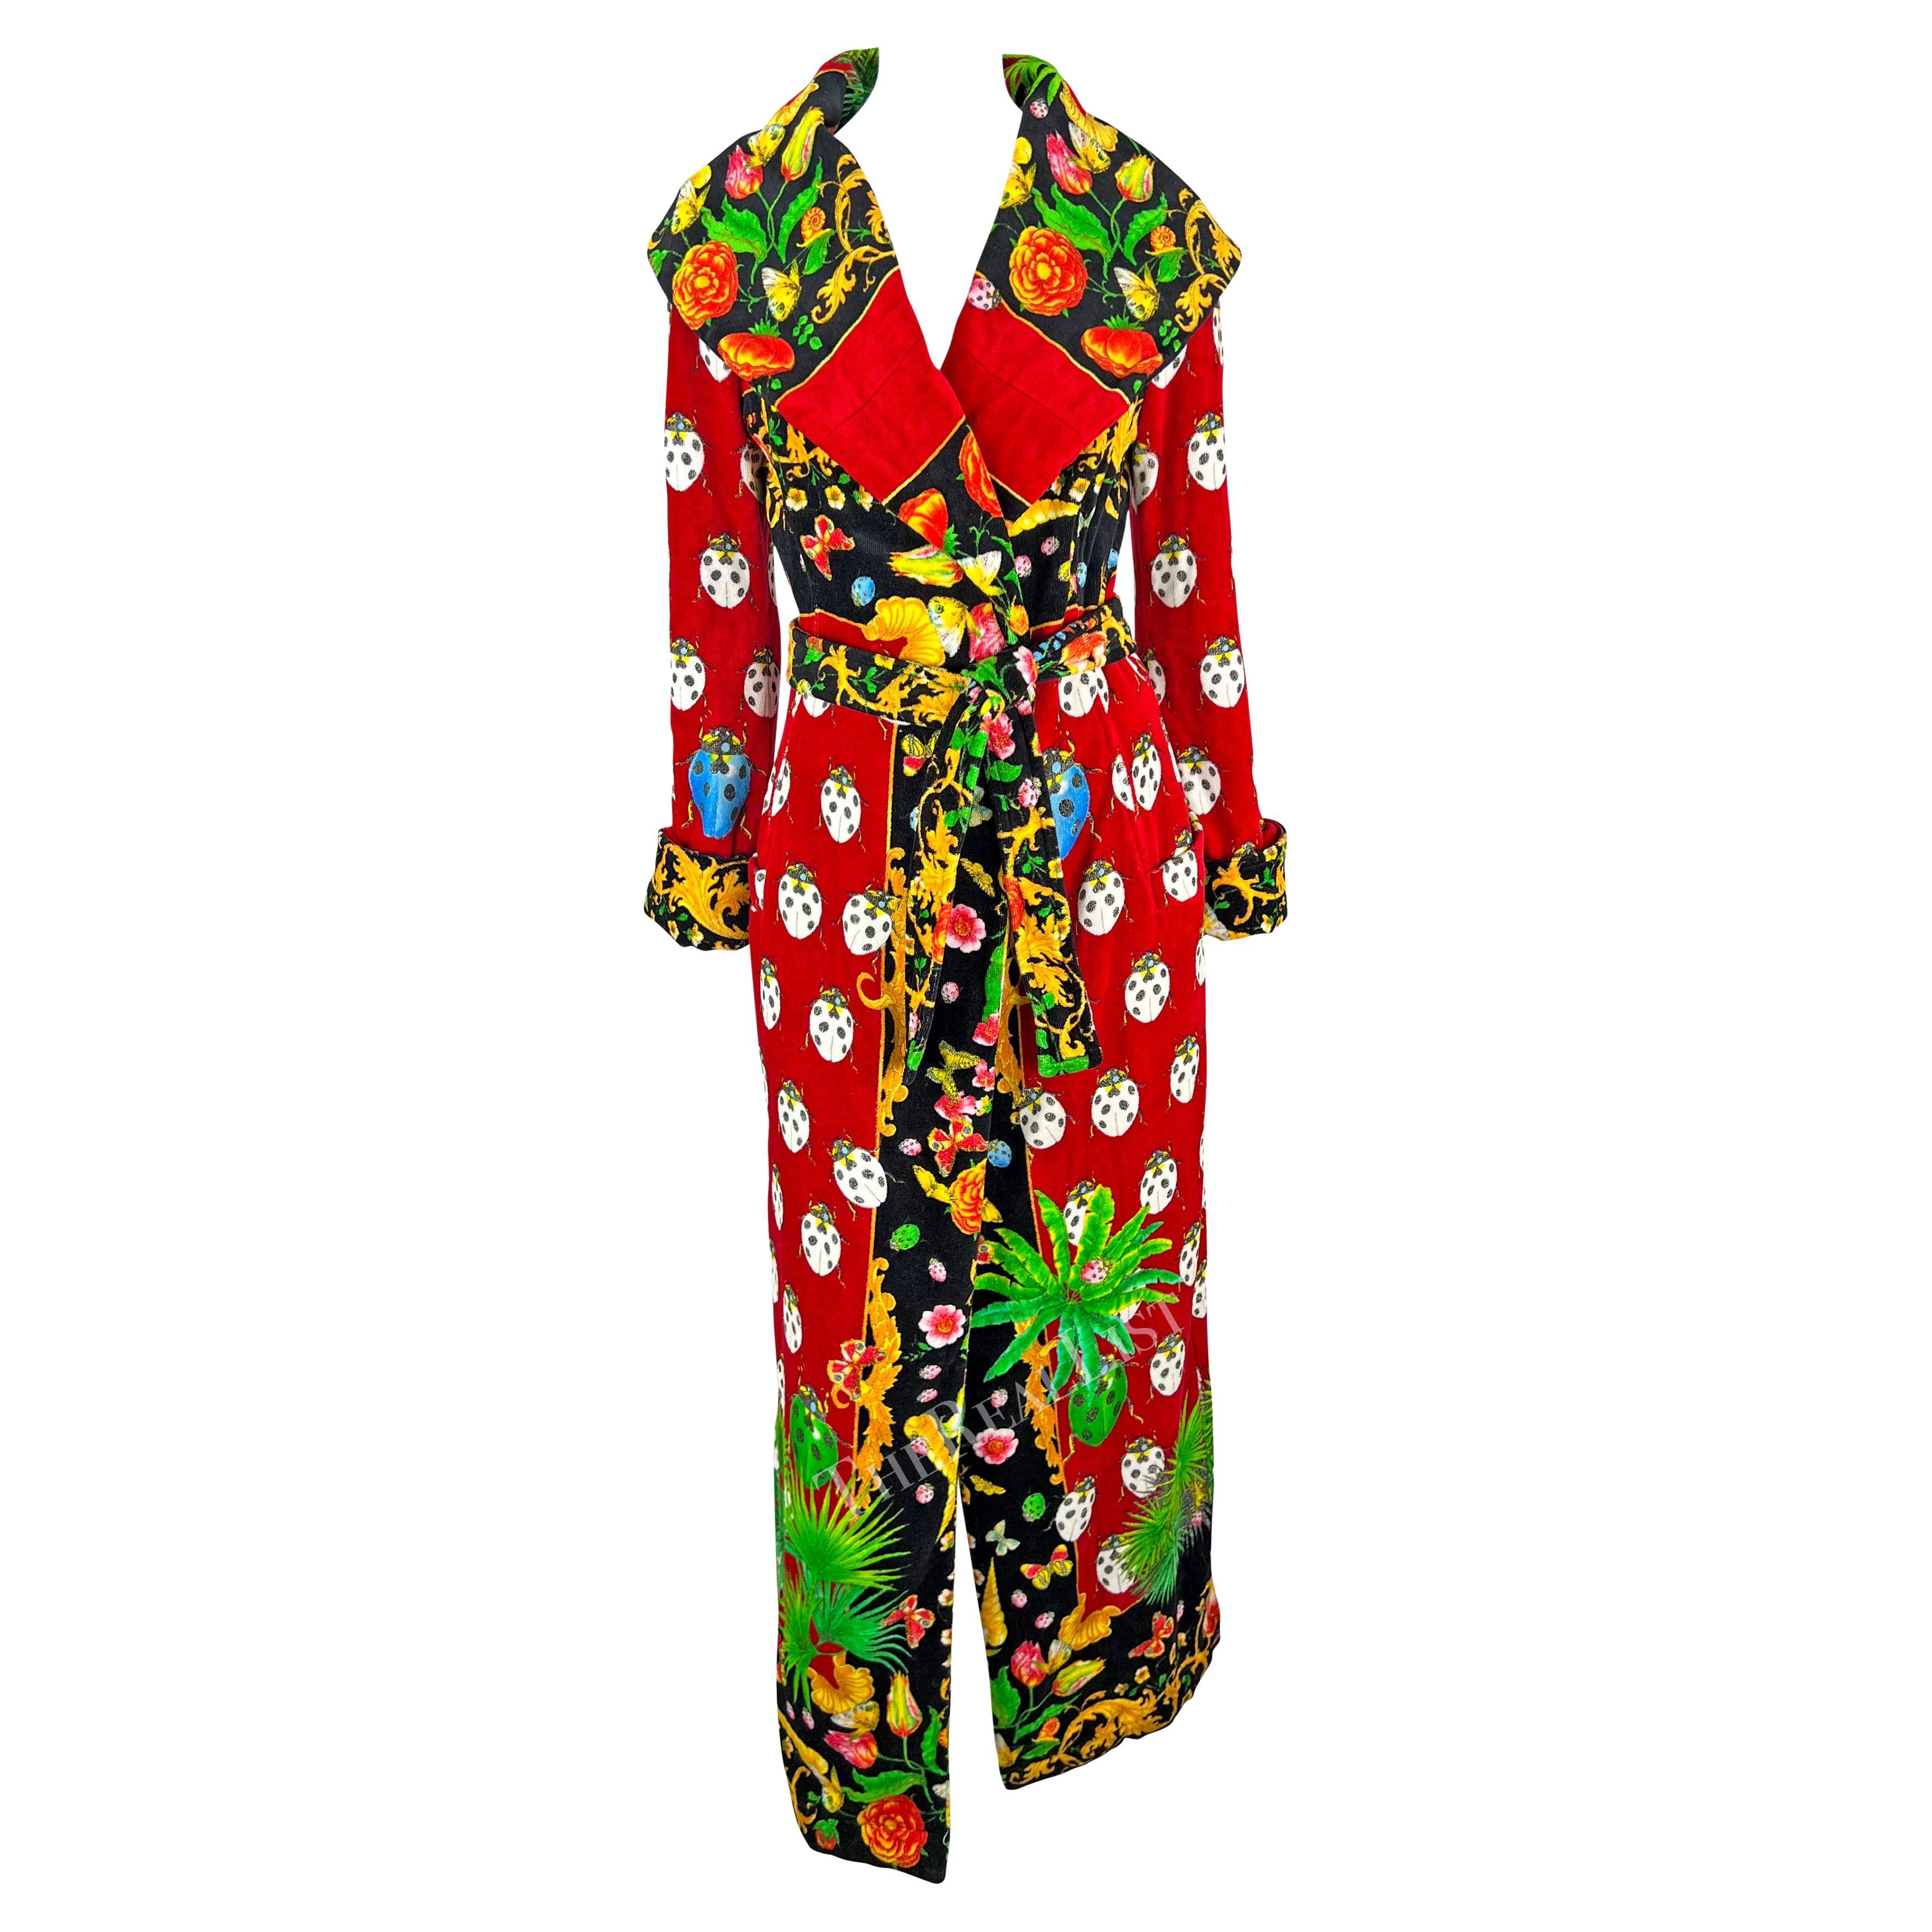 S/S 1995 Gianni Versace Red Lady Bug Print Corset Boned Terrycloth Robe For Sale